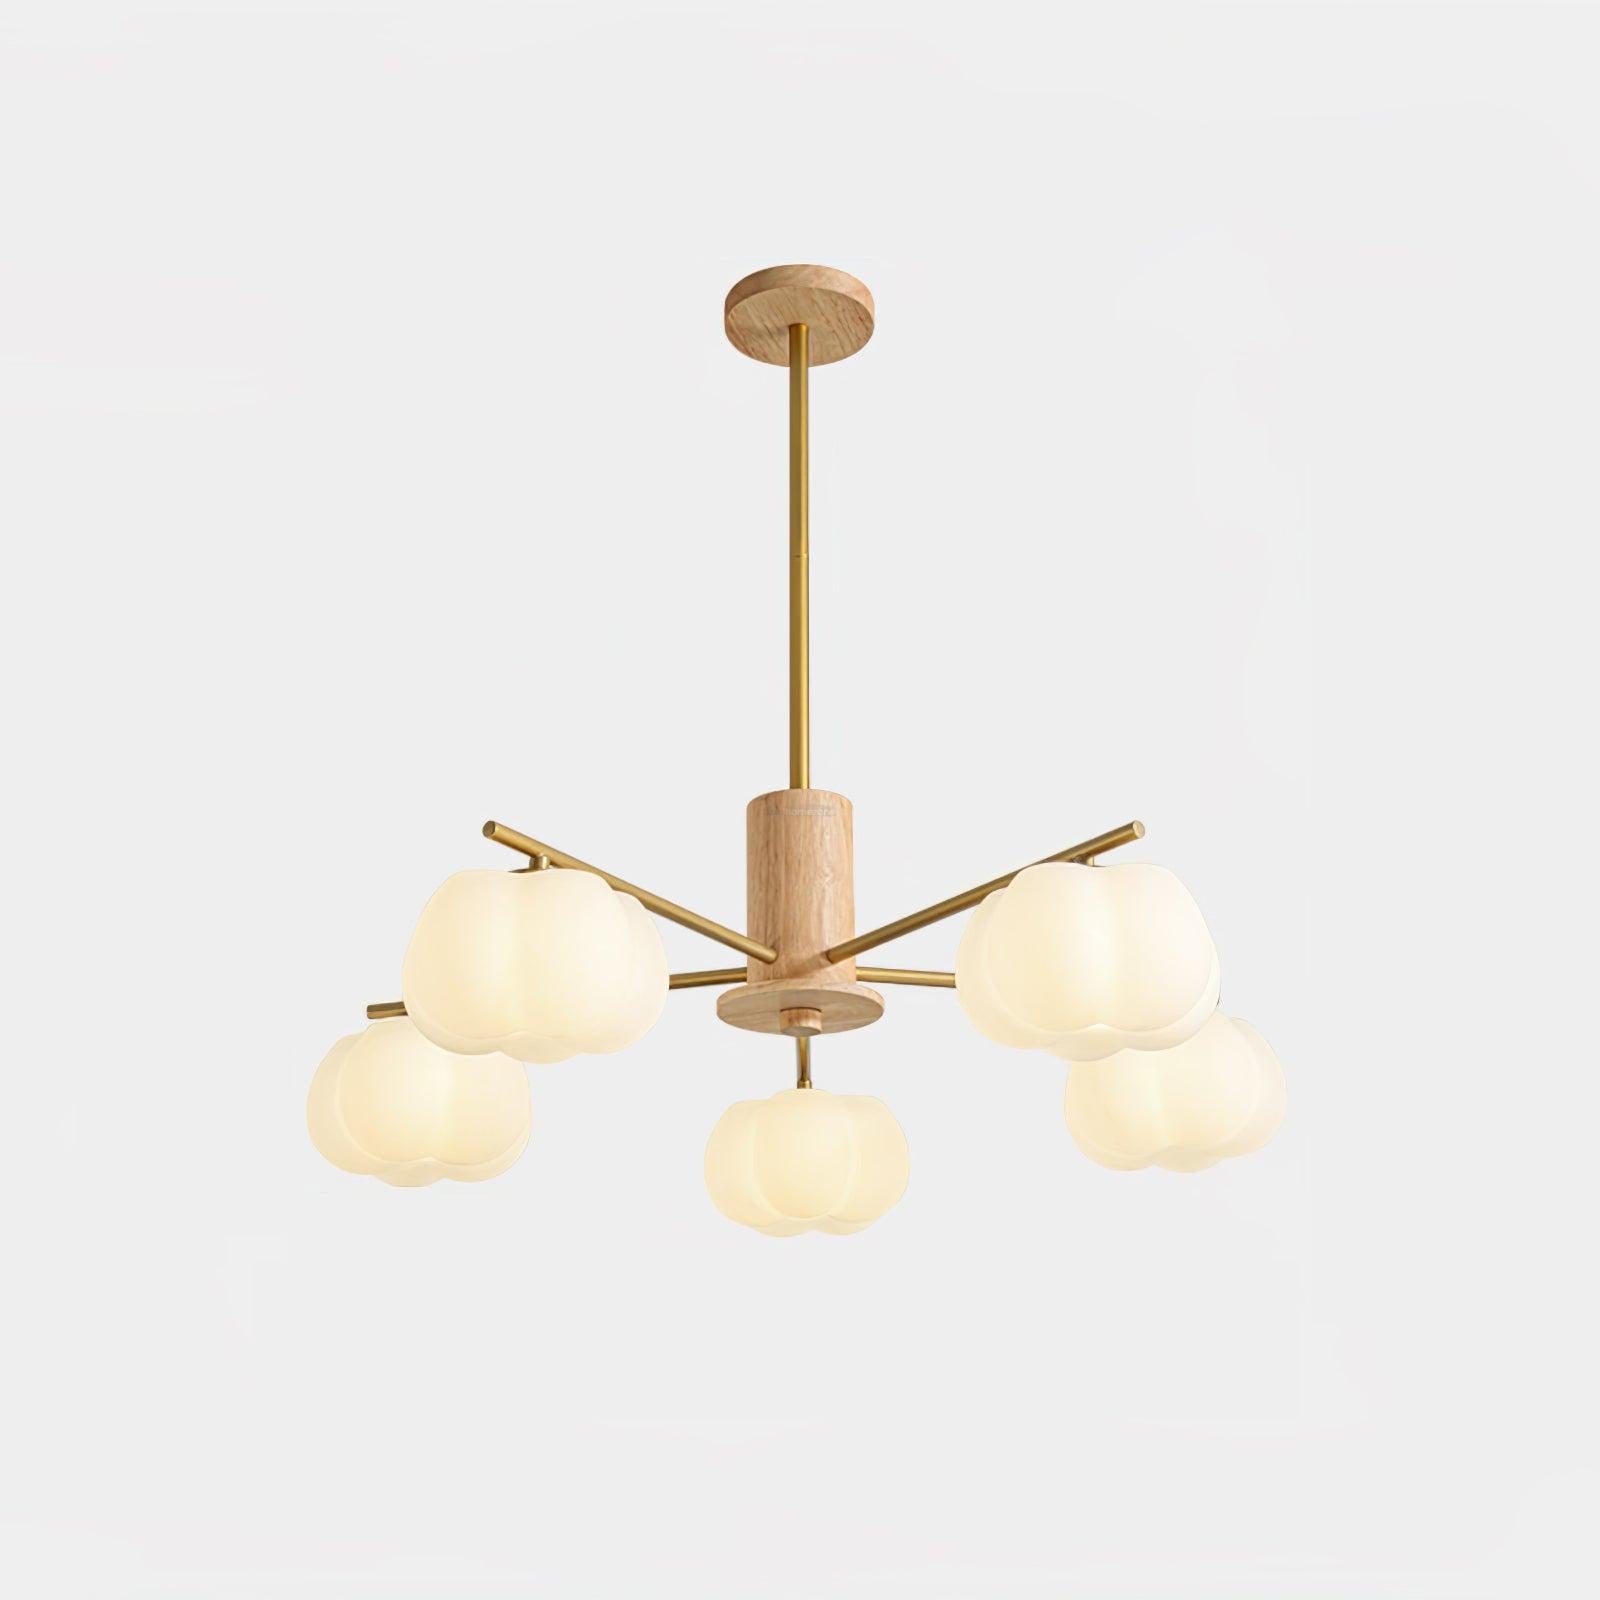 Wooden Cotton Balls Chandelier with 5/8 lamps